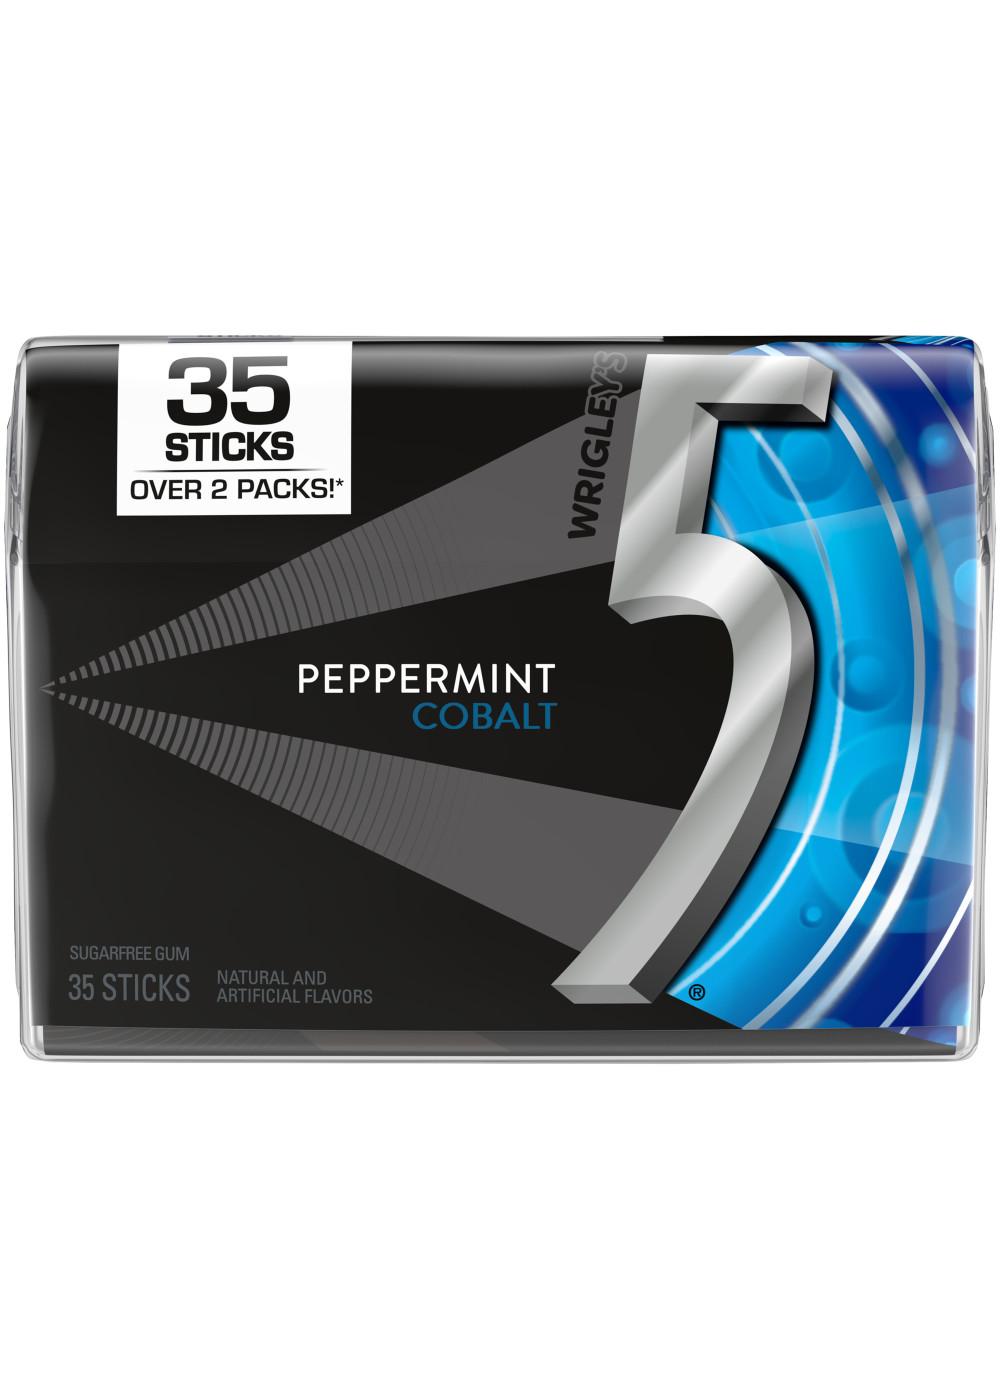 Wrigley's 5 Peppermint Cobalt Sugar Free Chewing Gum; image 1 of 7